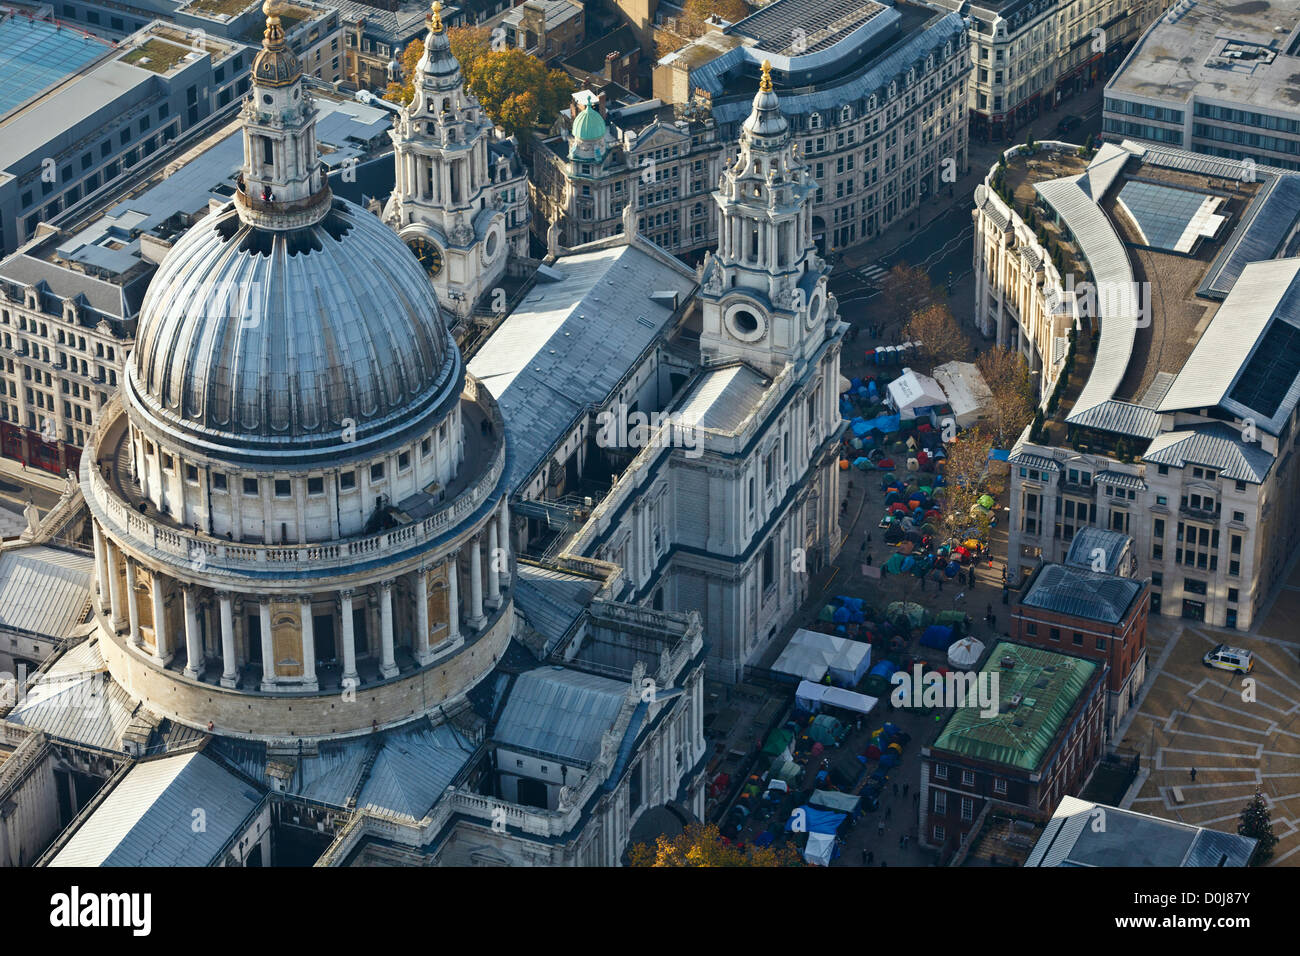 Aerial view of St Pauls Cathedral in London with adjacent anti-capitalist protestor's encampment. Stock Photo